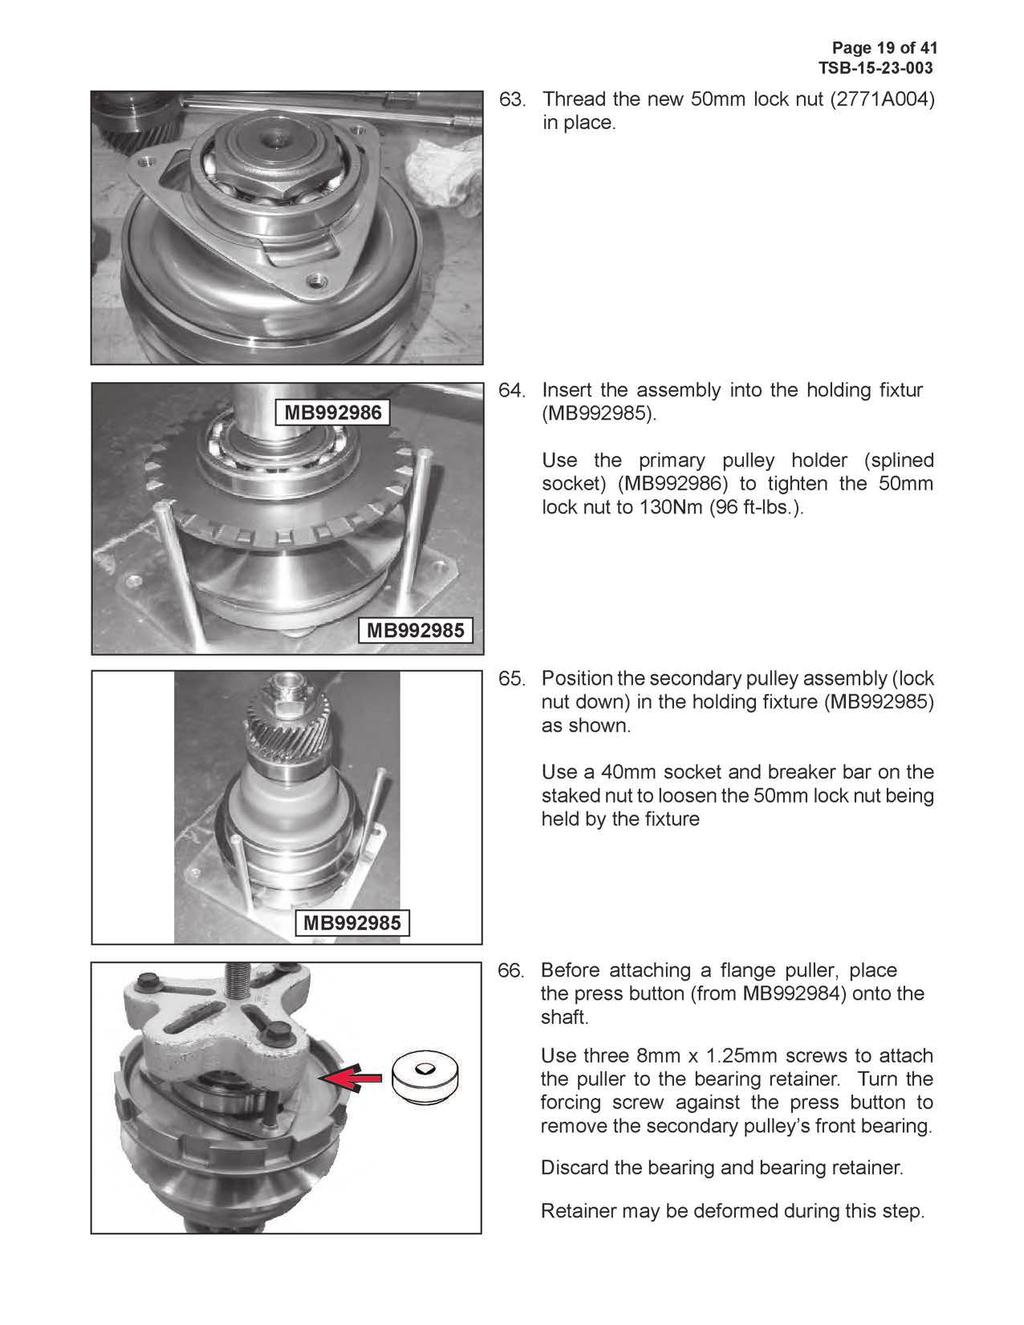 Page 19 of 41 63. Thread the new 50mm lock nut (2771A004) in place. 64. Insert the assembly into the holding fixtur (MB992985).